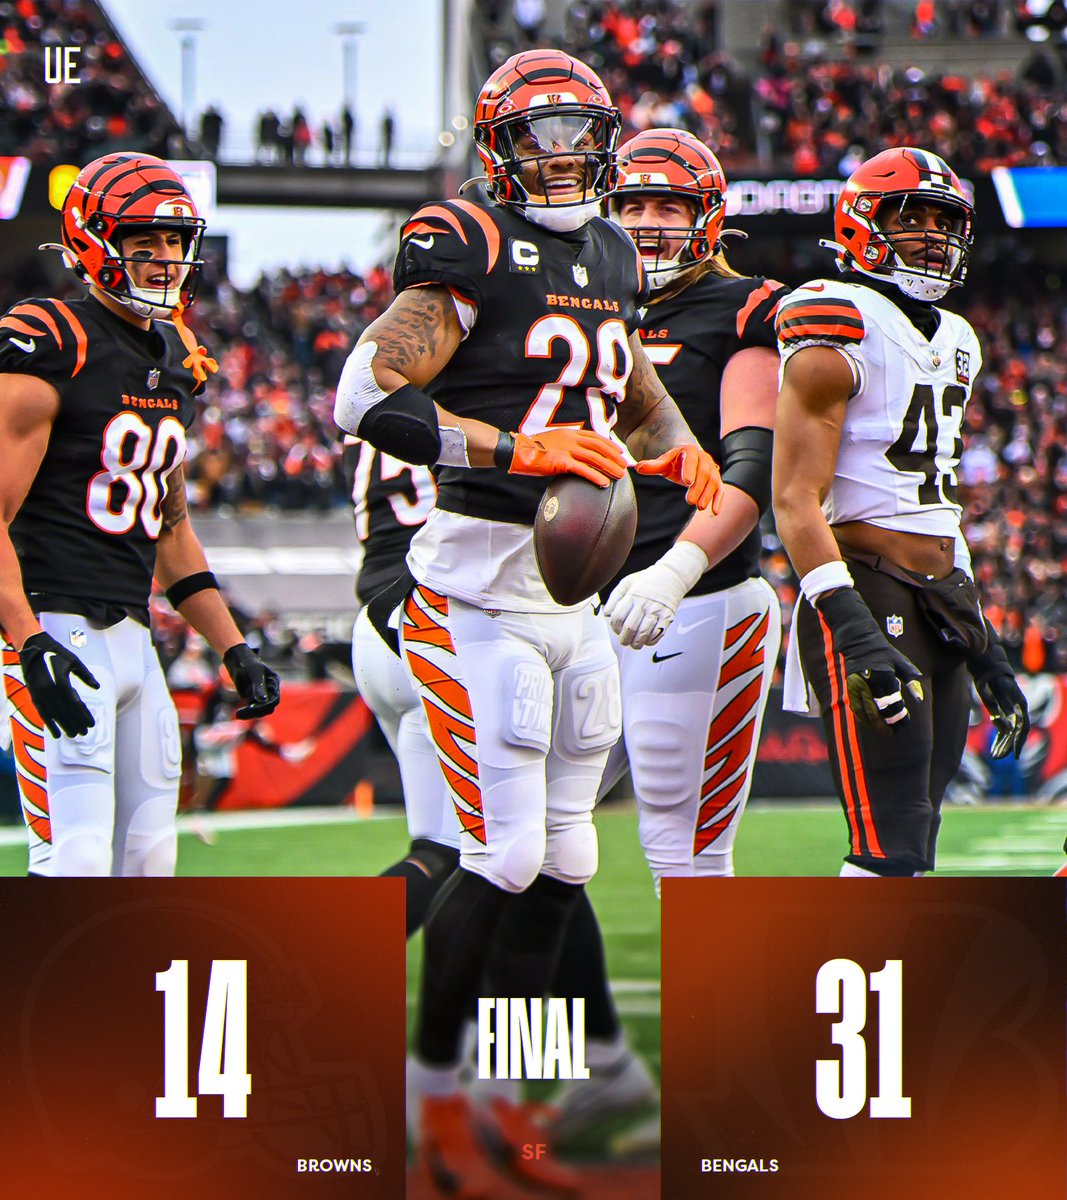 FINAL: Bengals end their season with a BIG W! #CLEvsCIN